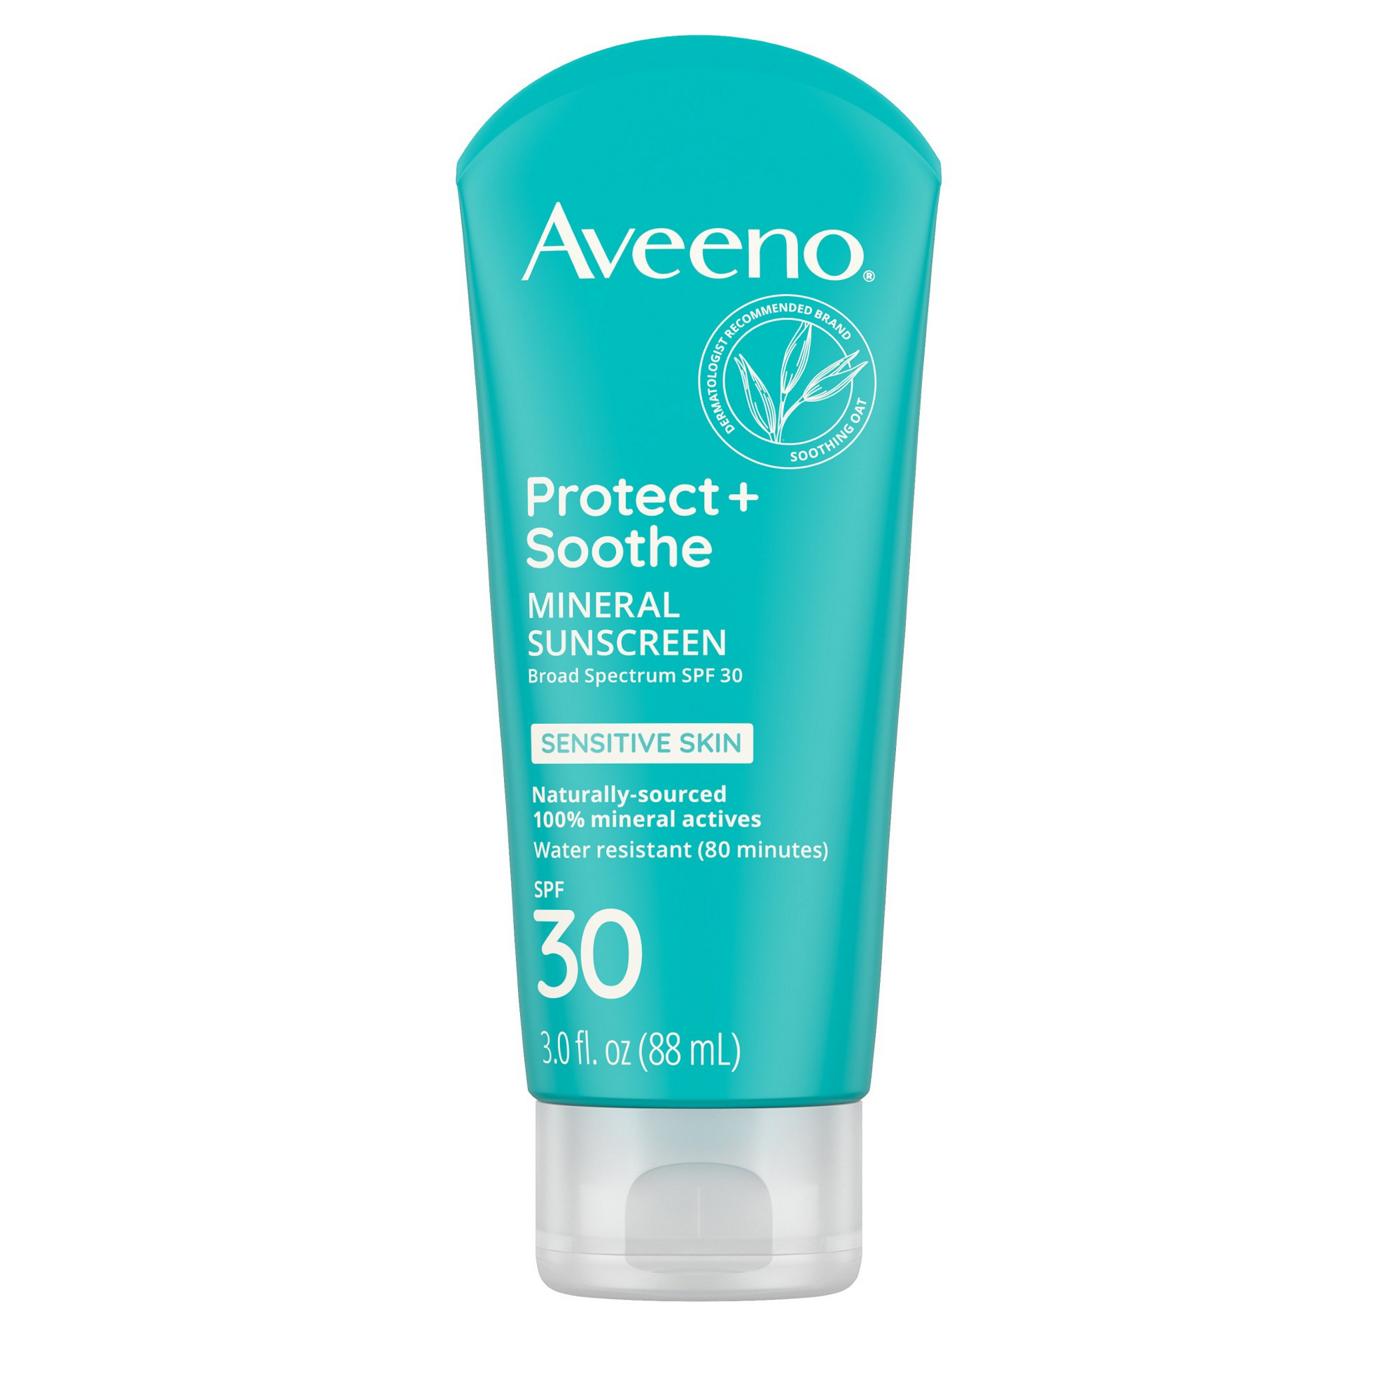 Aveeno Protect + Soothe Mineral Sunscreen Broad Spectrum SPF 30; image 1 of 8